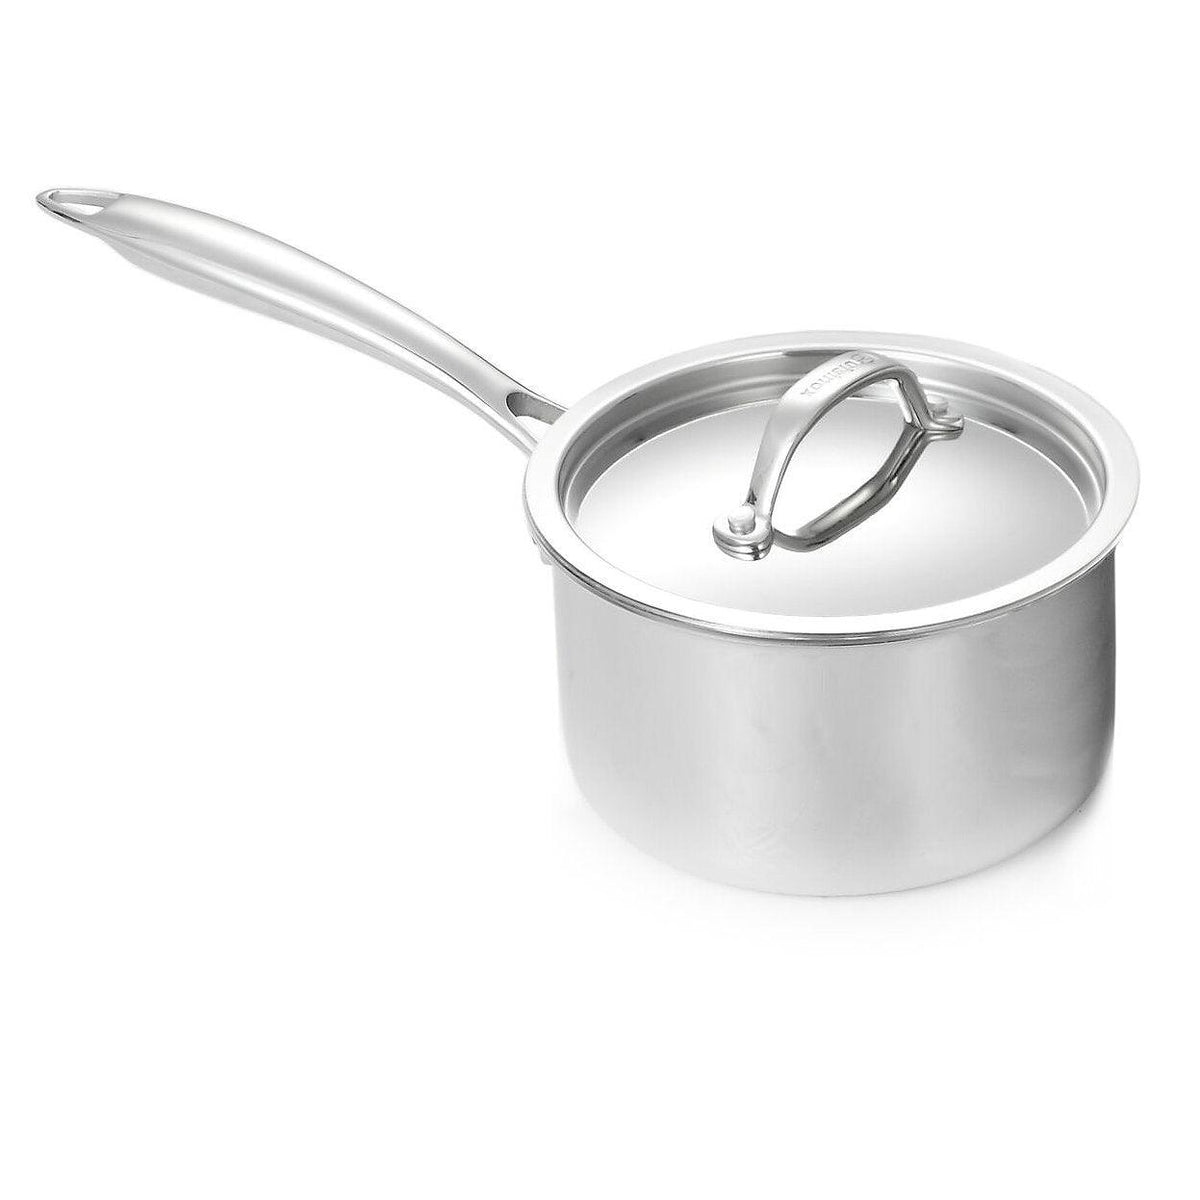 Browne (5724033) 3-1/2 qt Stainless Steel Sauce Pan